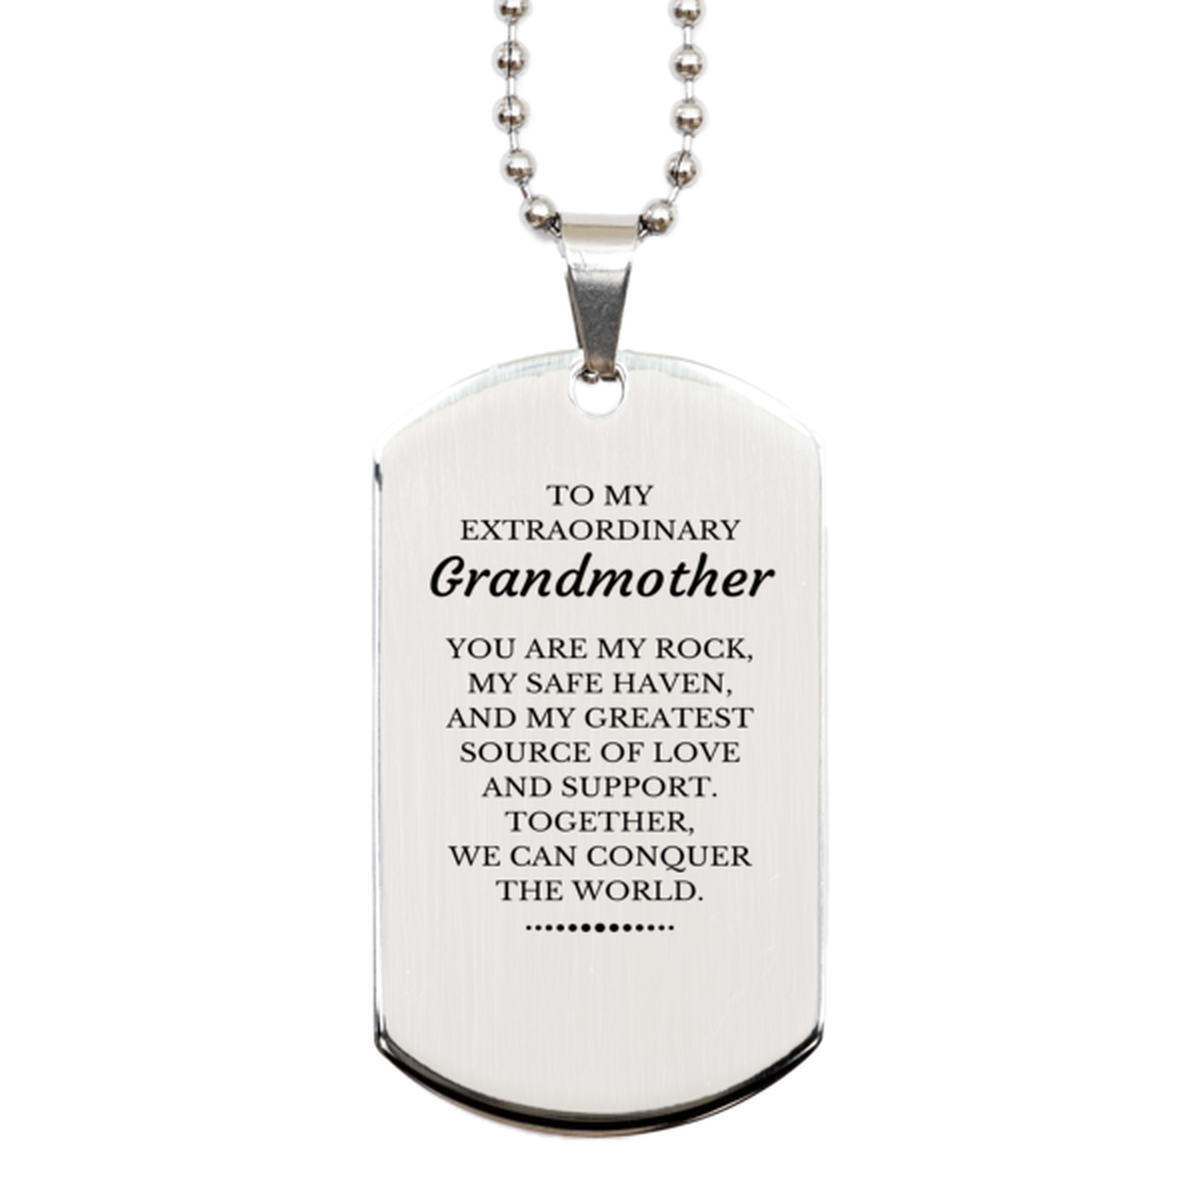 To My Extraordinary Grandmother Gifts, Together, we can conquer the world, Birthday Silver Dog Tag For Grandmother, Christmas Gifts For Grandmother